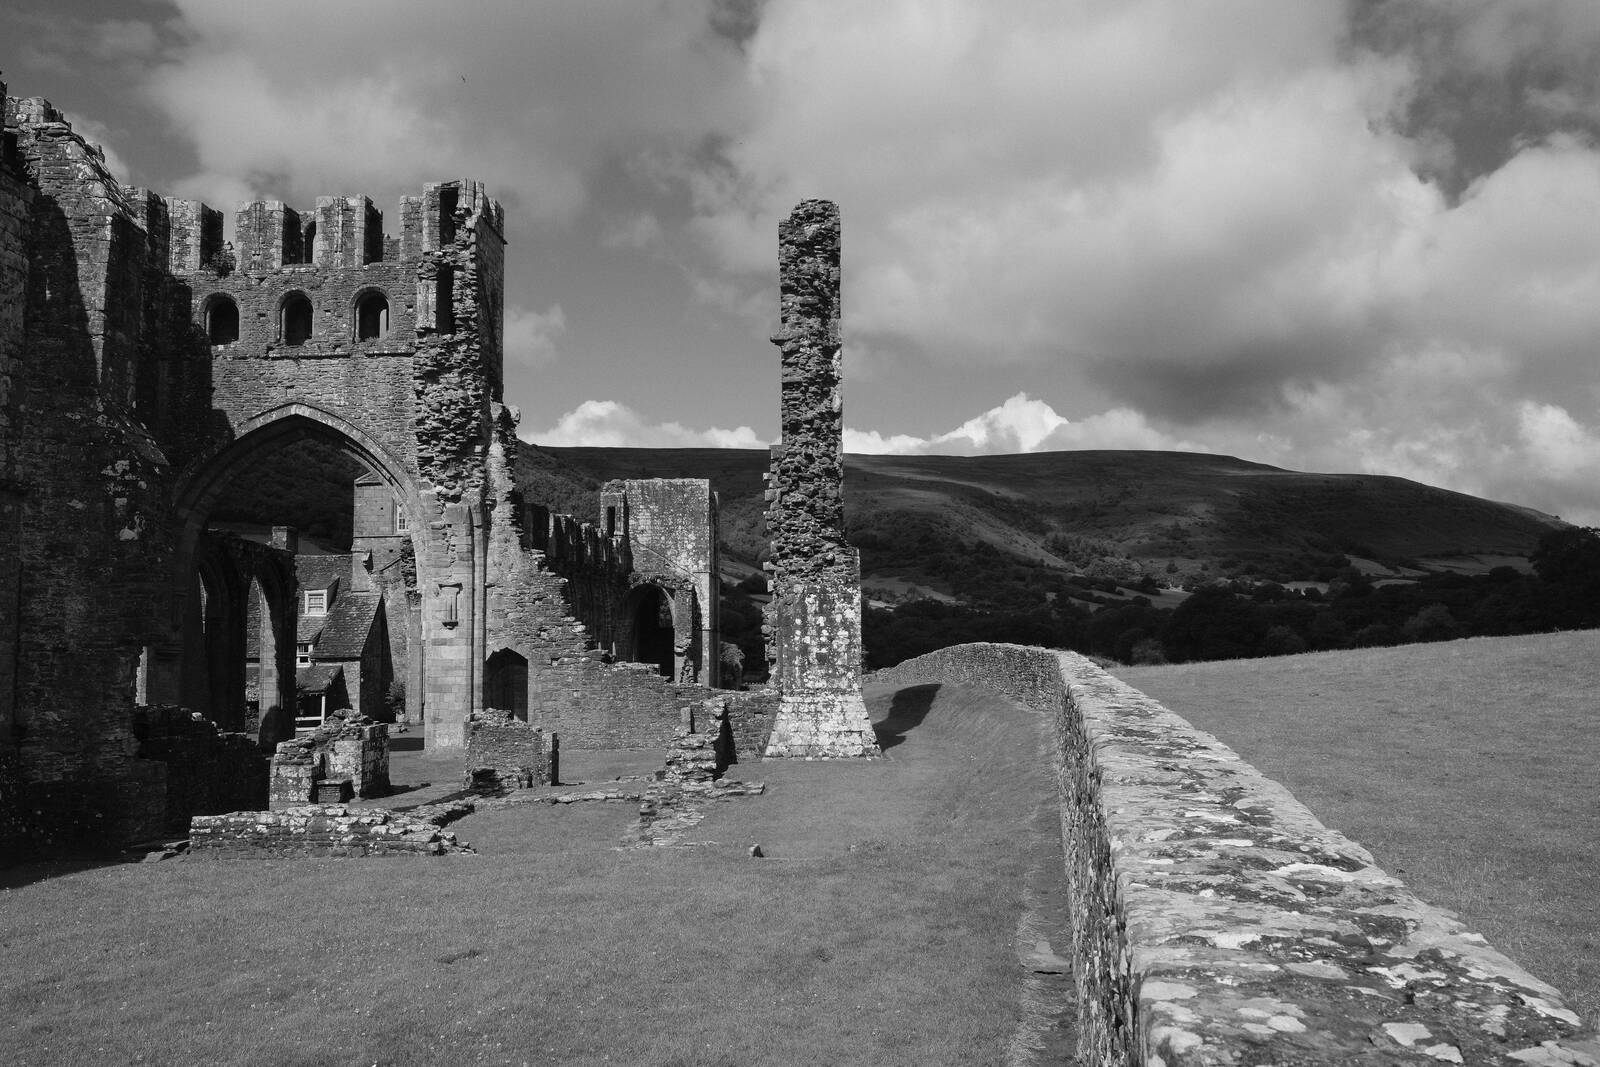 Image of Llanthony Priory by Andreas Marjoram